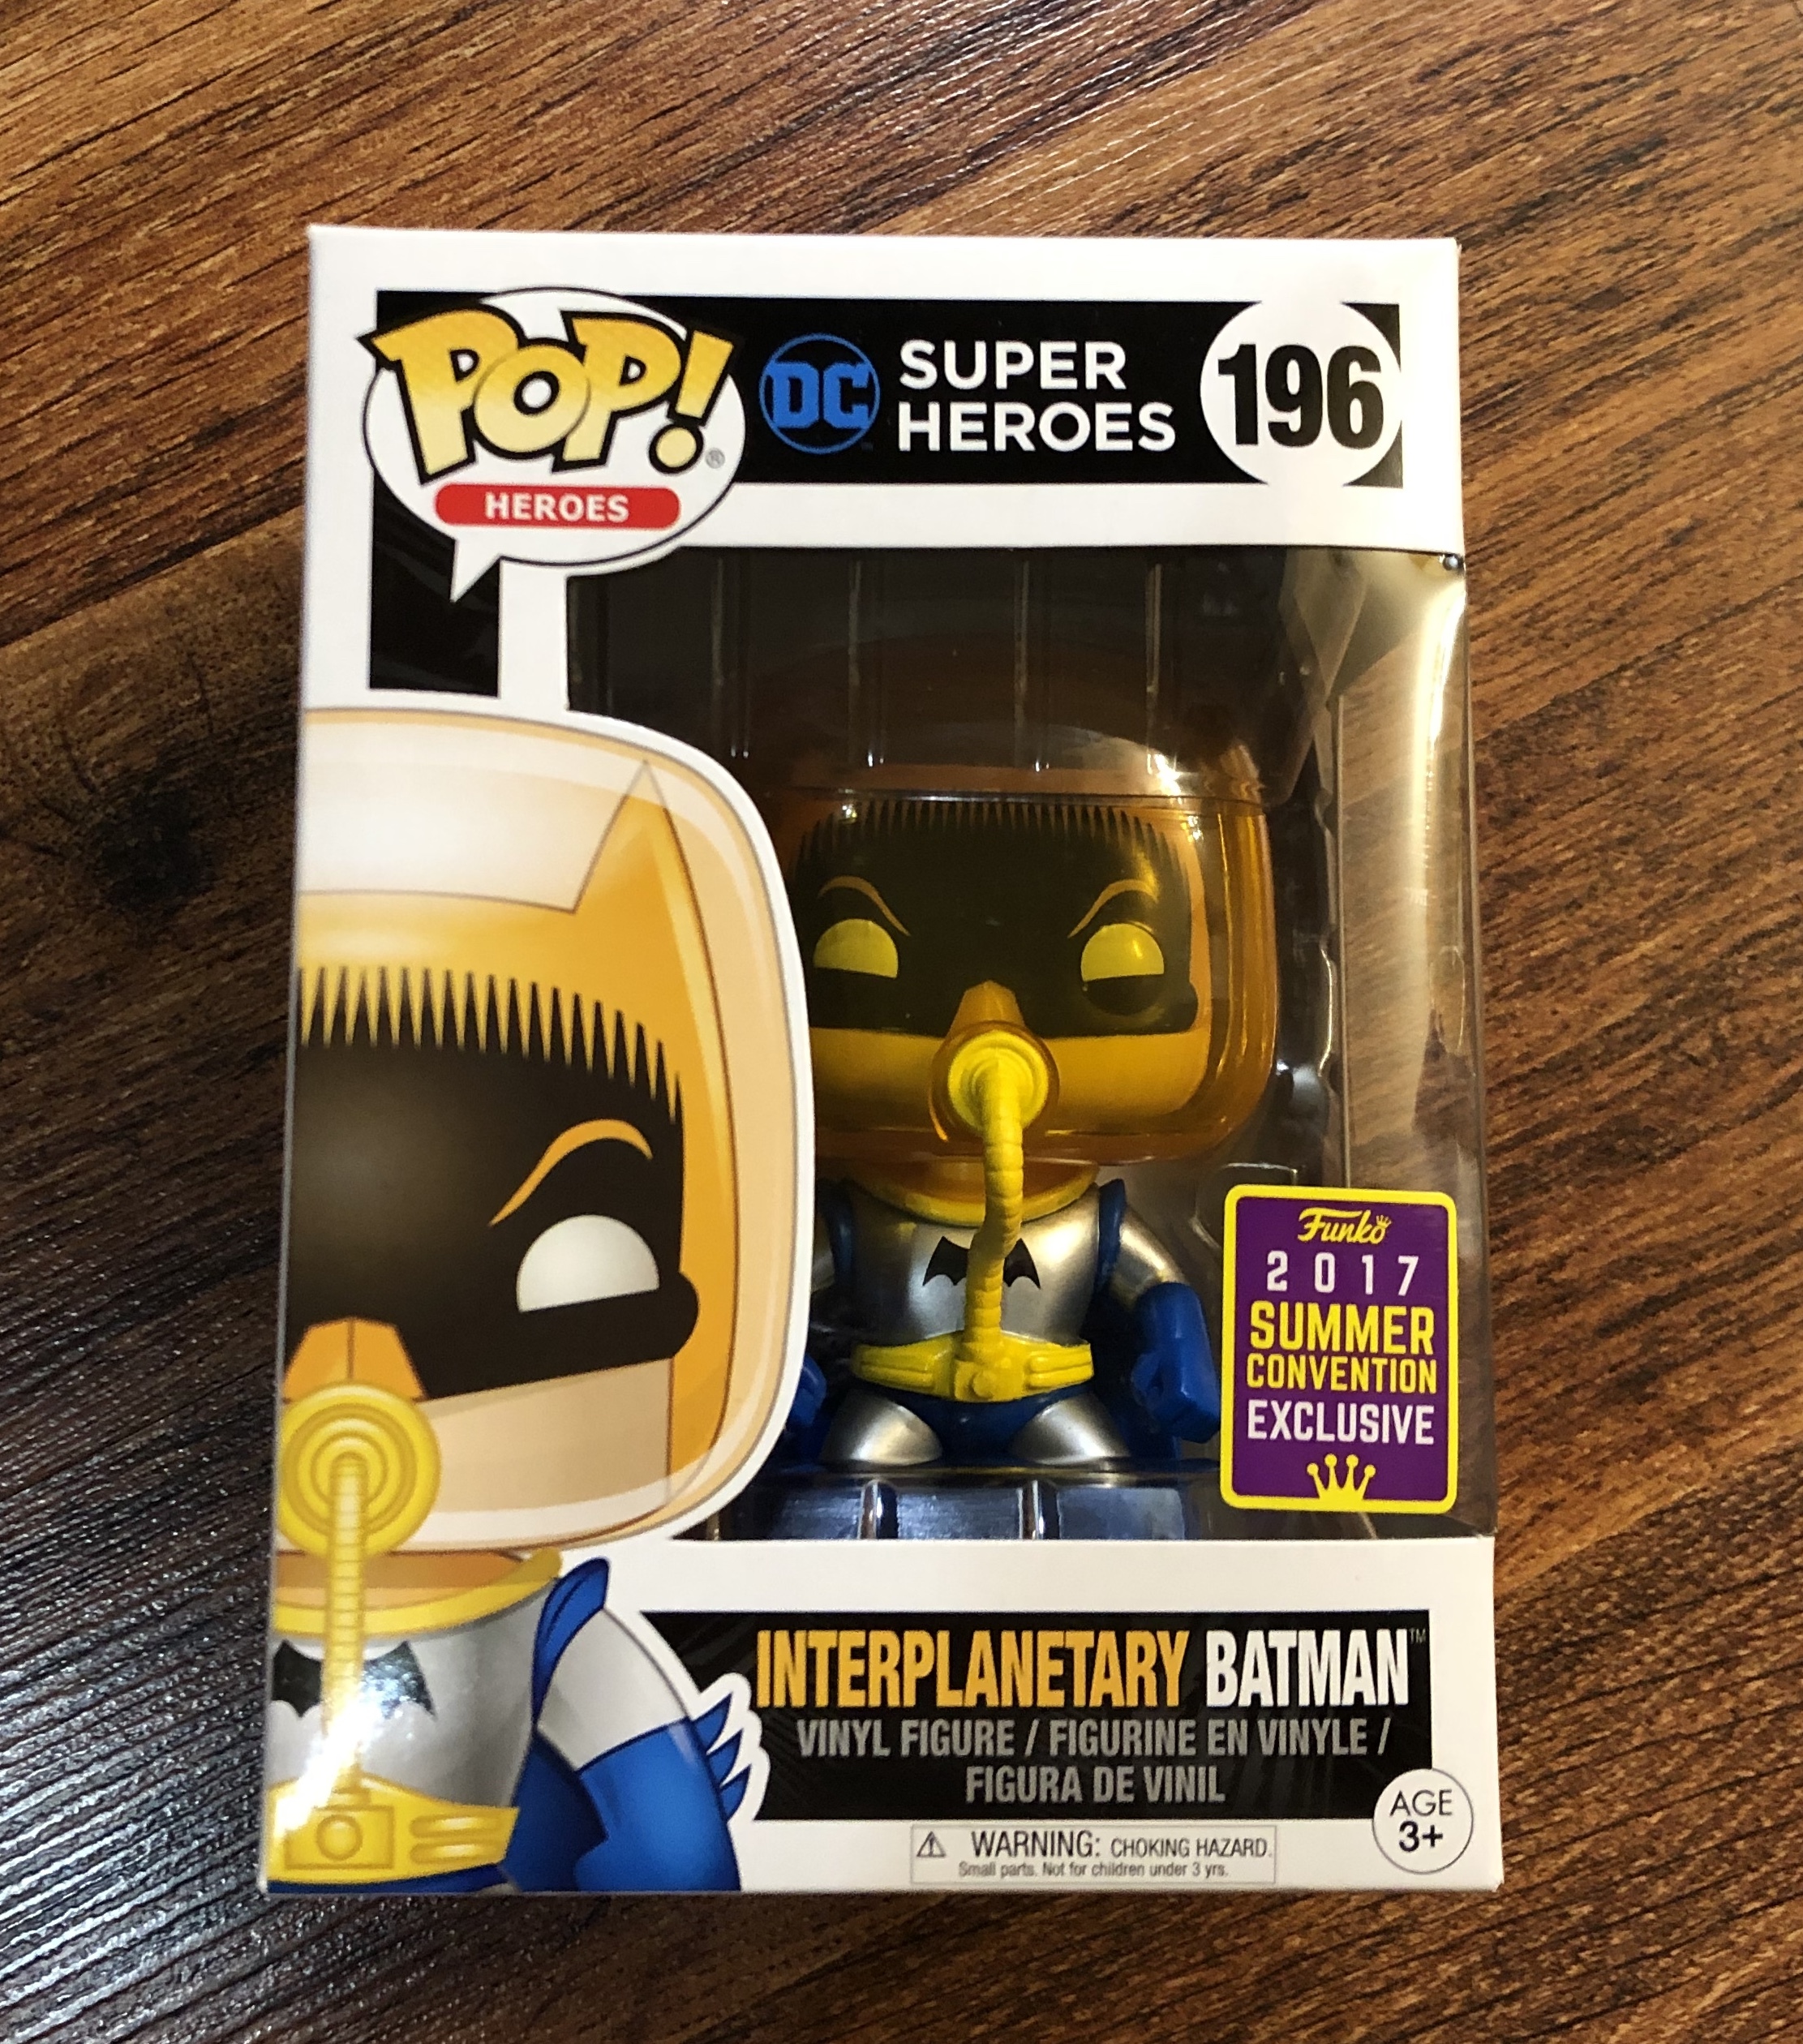 Interplanetary Batman Exclusive with SDCC Sticker 2017 Funko Pop Heroes 